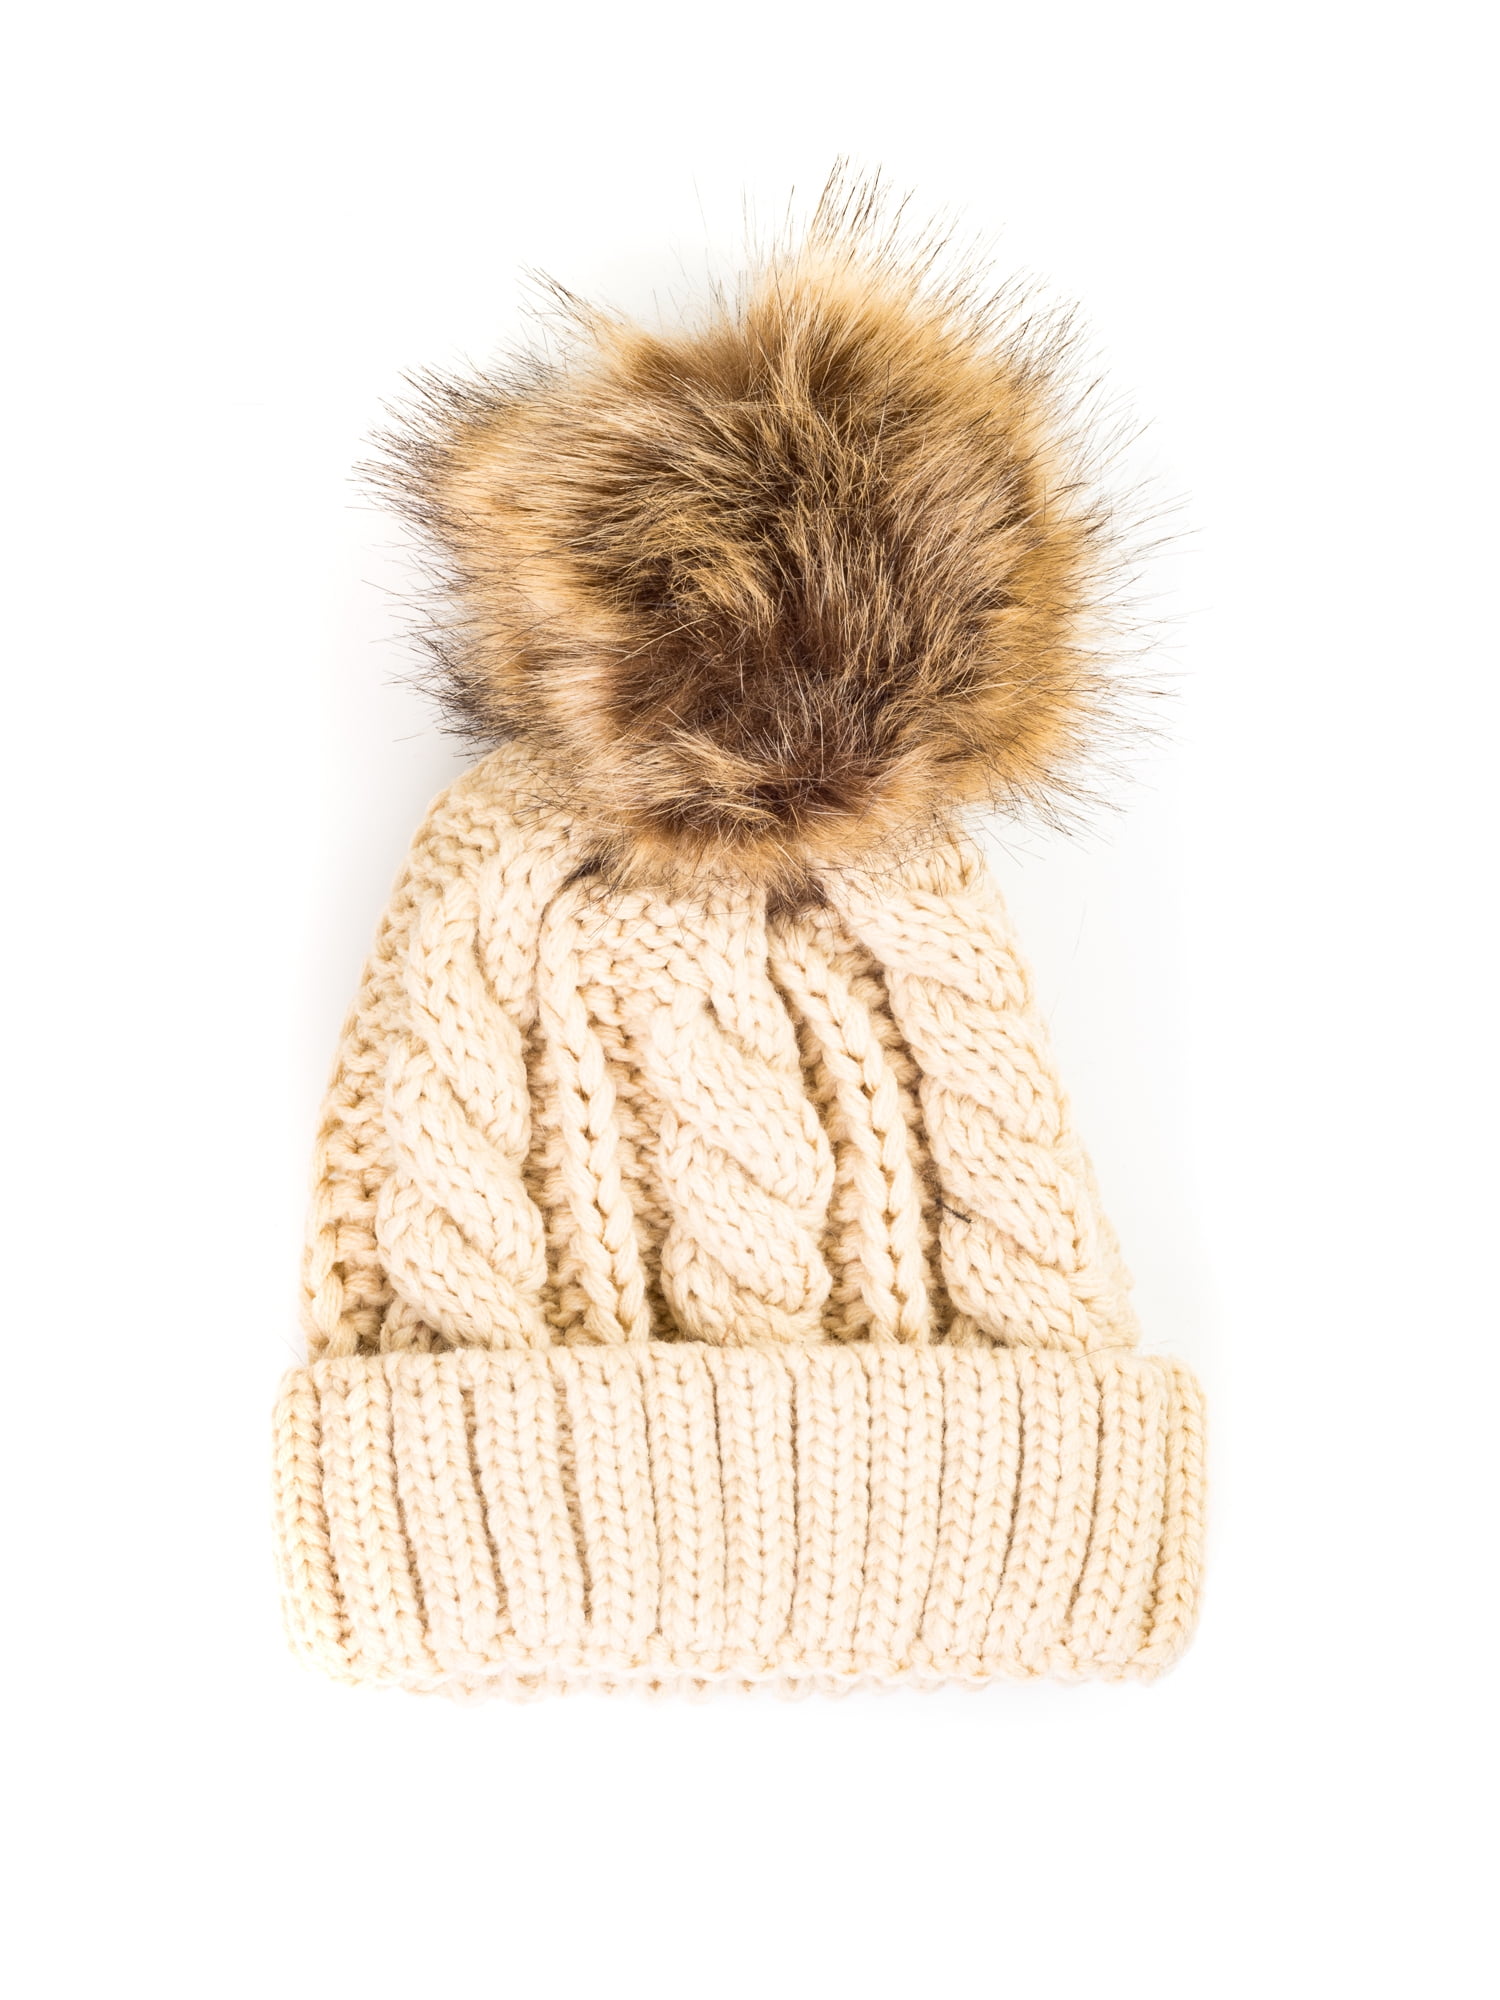 Tan Cable Knit Baby Bonnet Winter Hat with Pom Pom